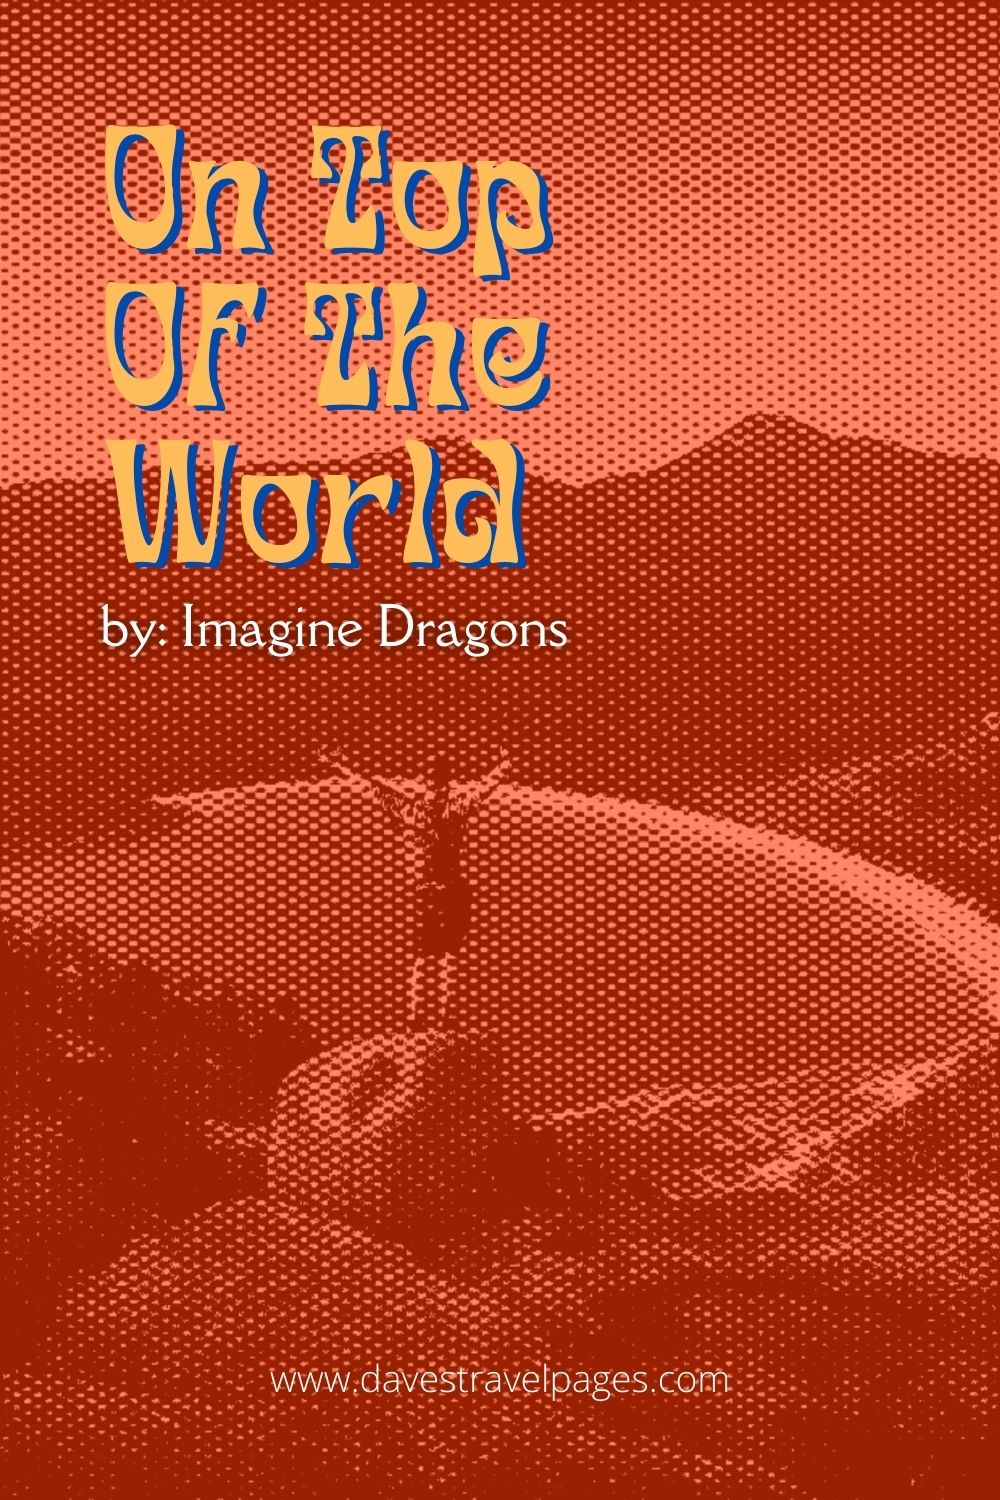 Best Travel Songs: “On Top of the World” by Imagine Dragons Song